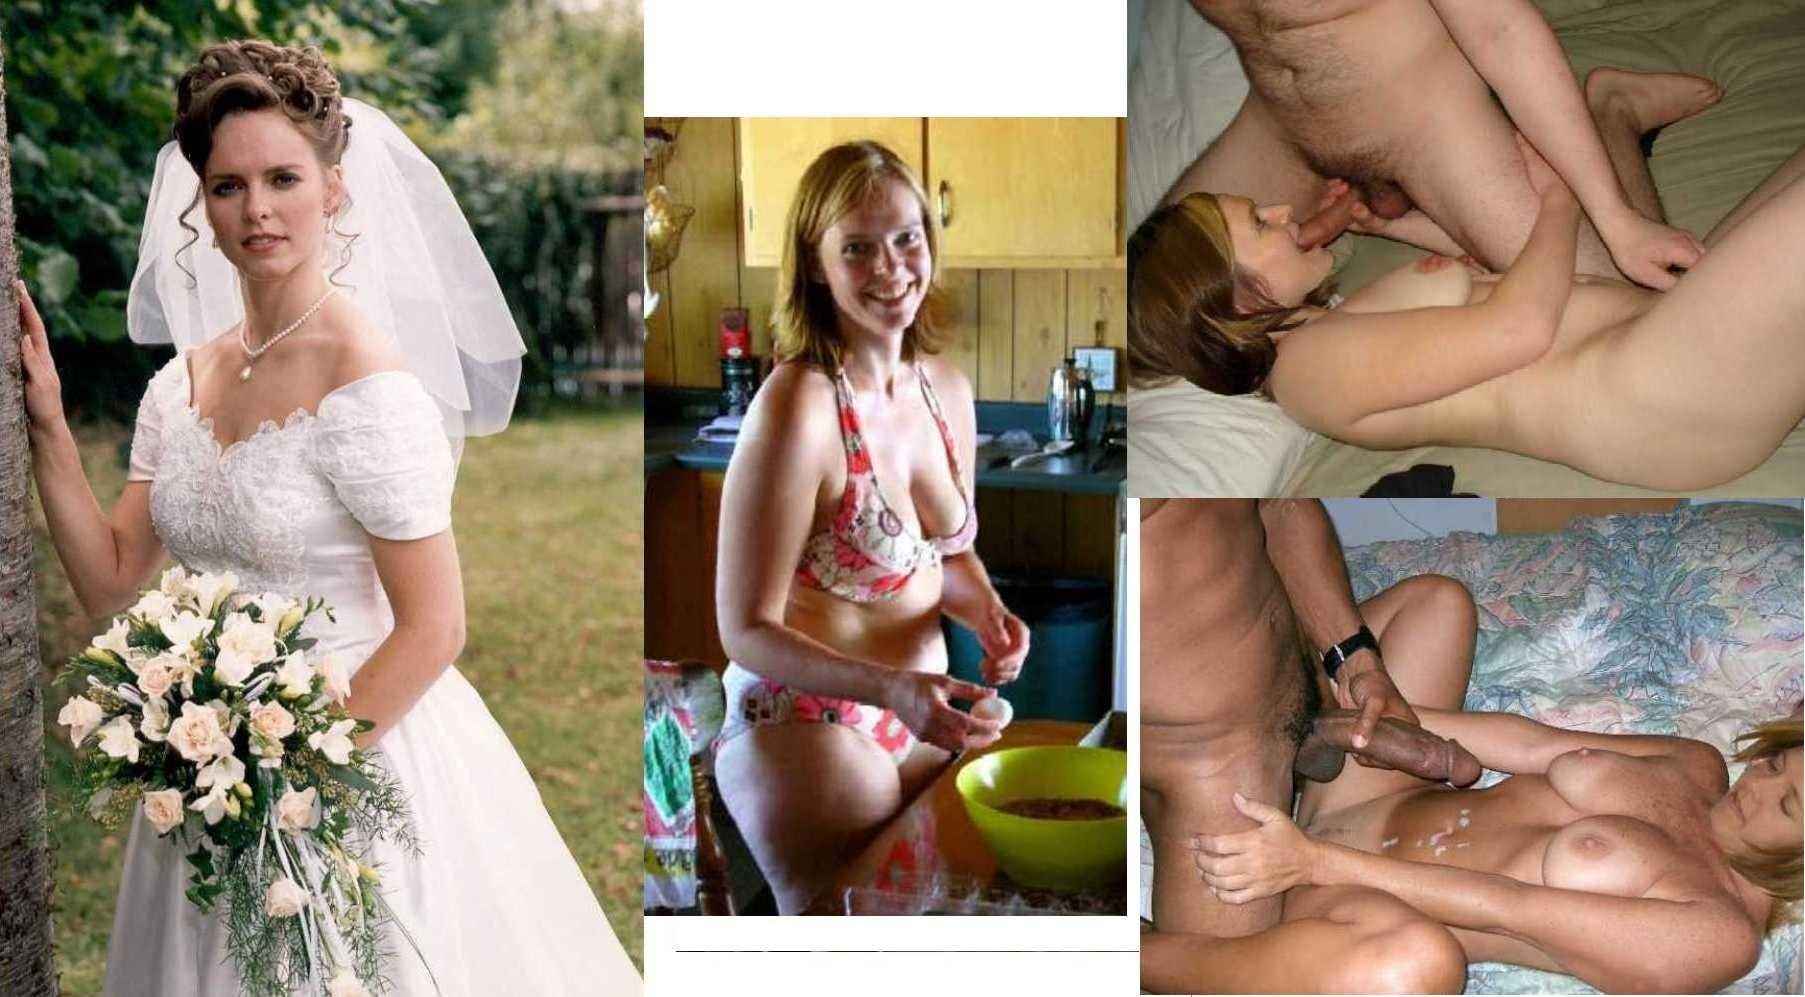 Naked Married Women Private (50 photos)